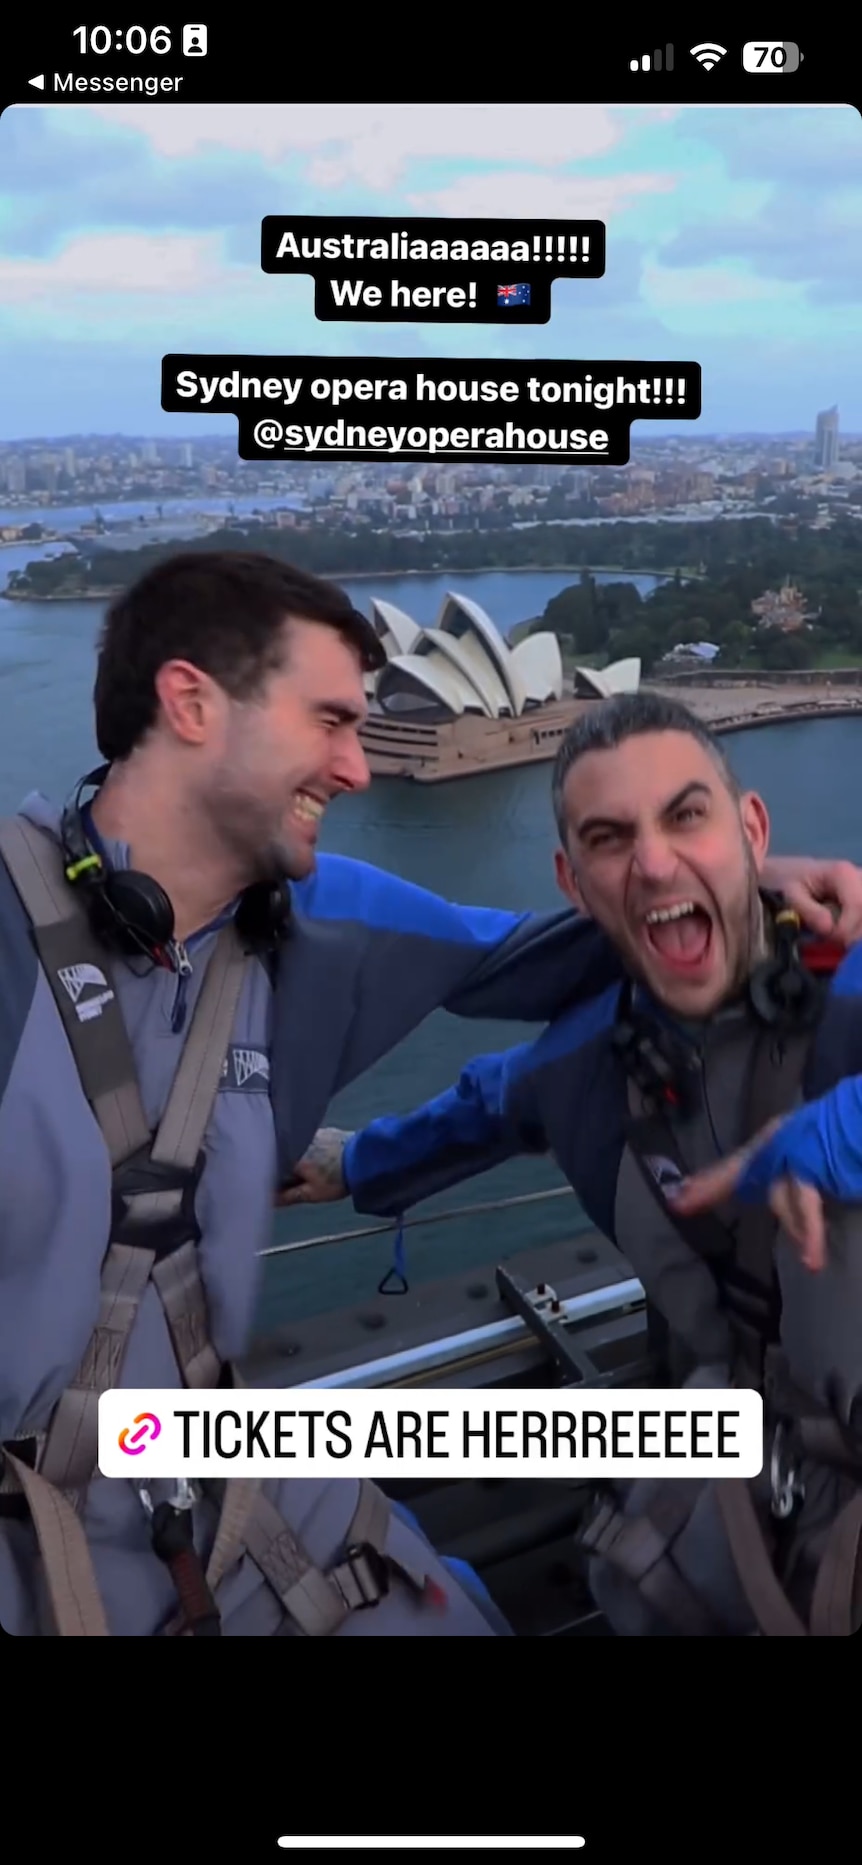 Screengrab of an Instagram story showing two men on the Sydney Harbour Bridge with the Opera House behind them